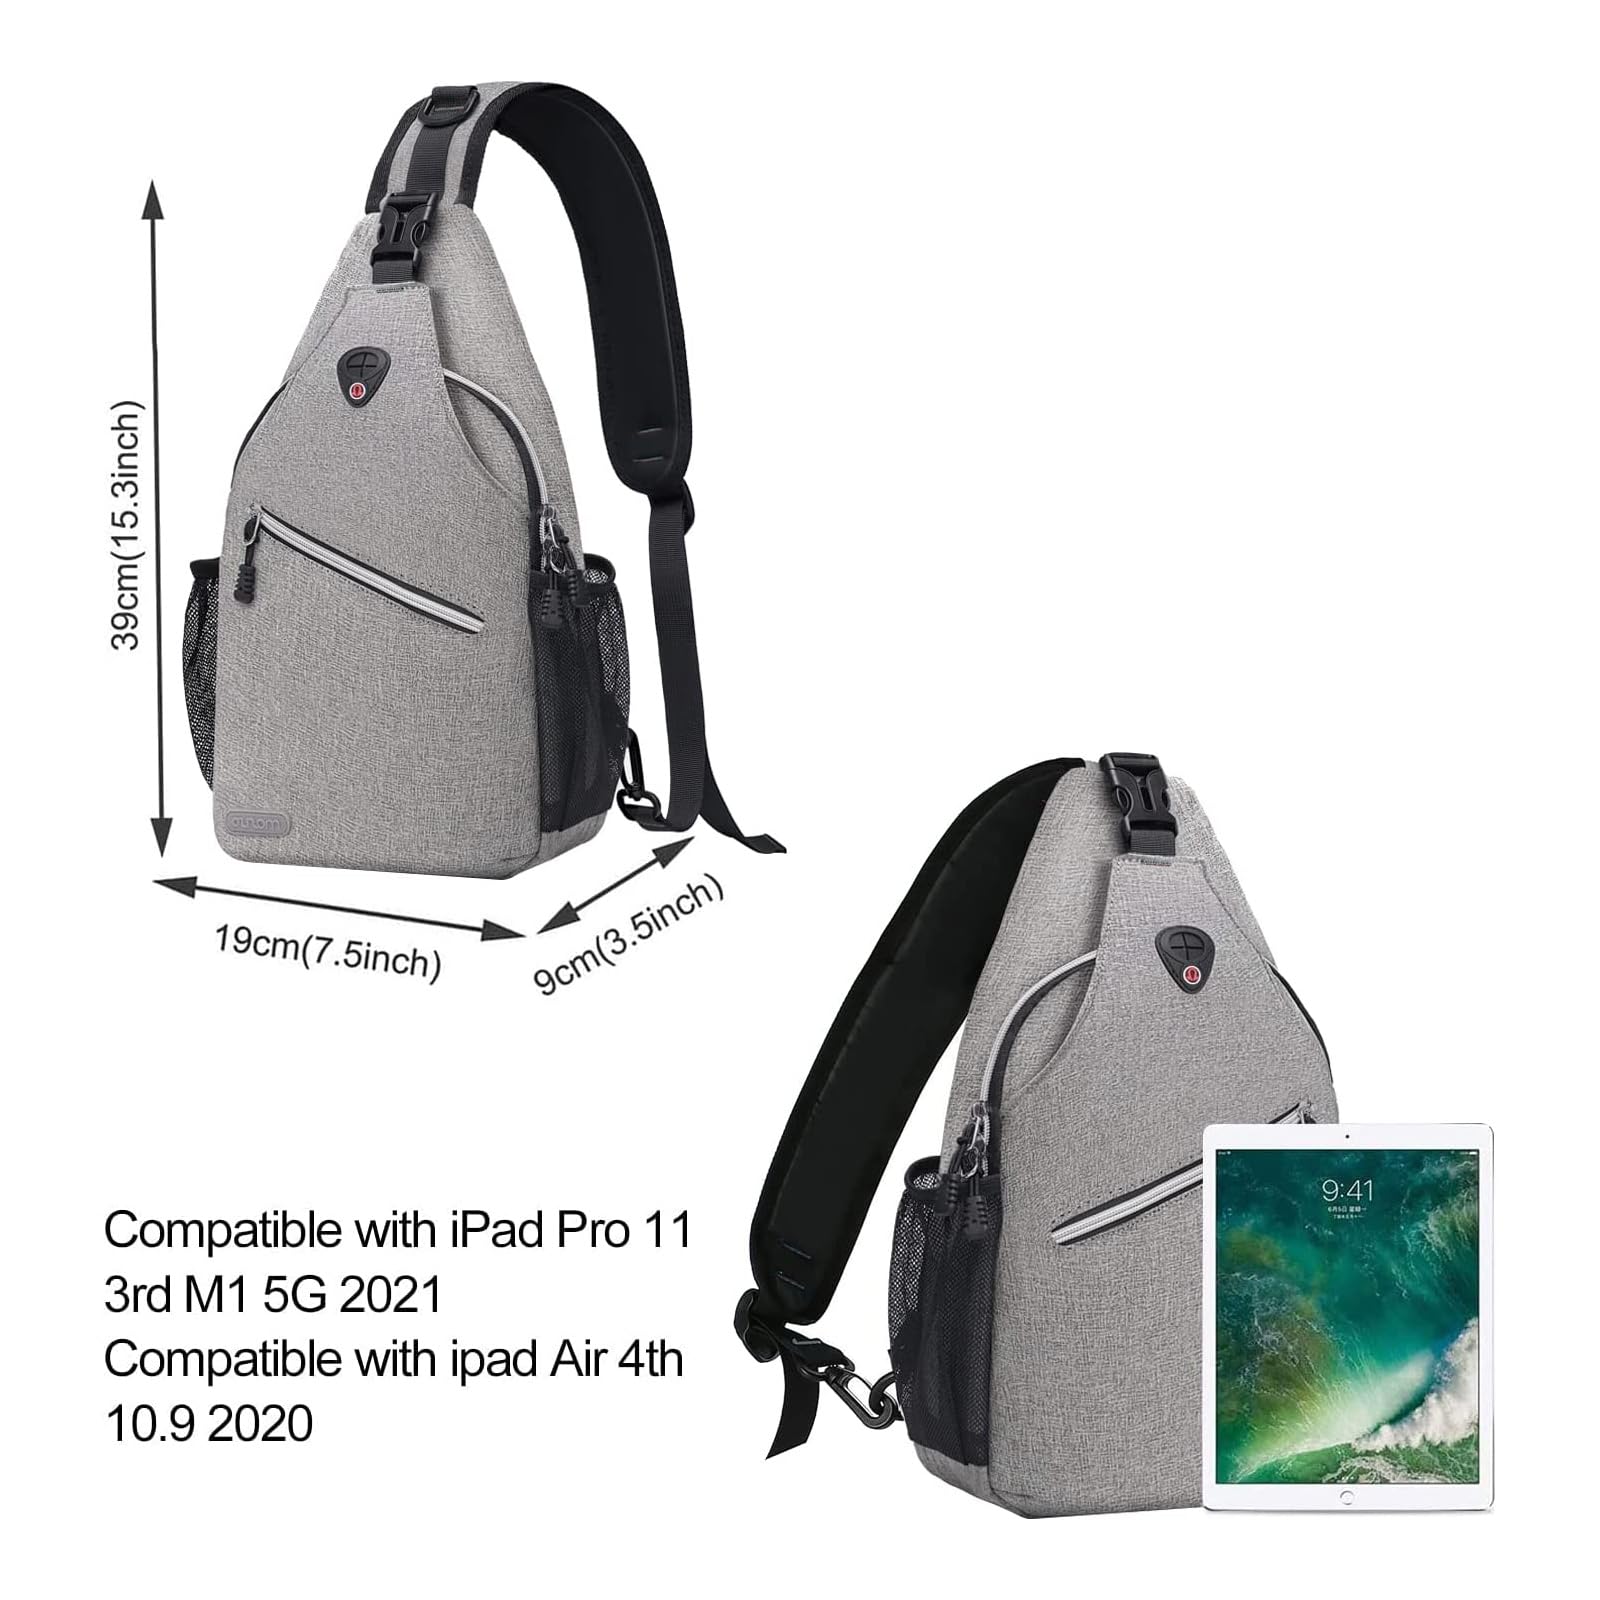 Worth Your Choice-Crossbody Shoulder Bag Travel Hiking Daypack